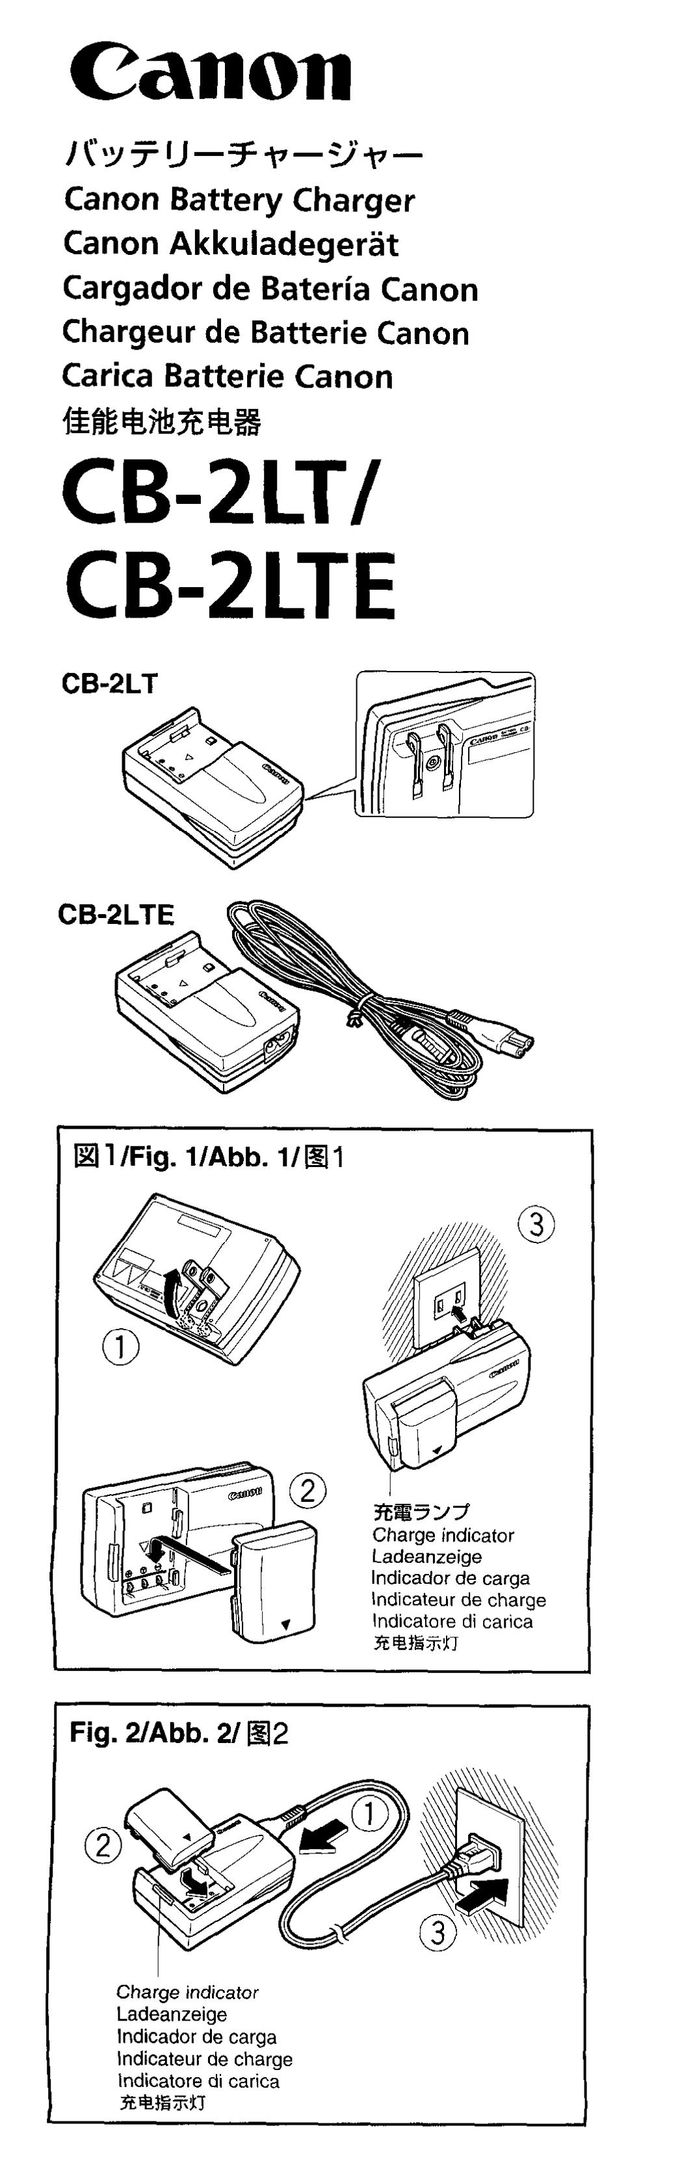 Canon CB-2LTE Battery Charger User Manual